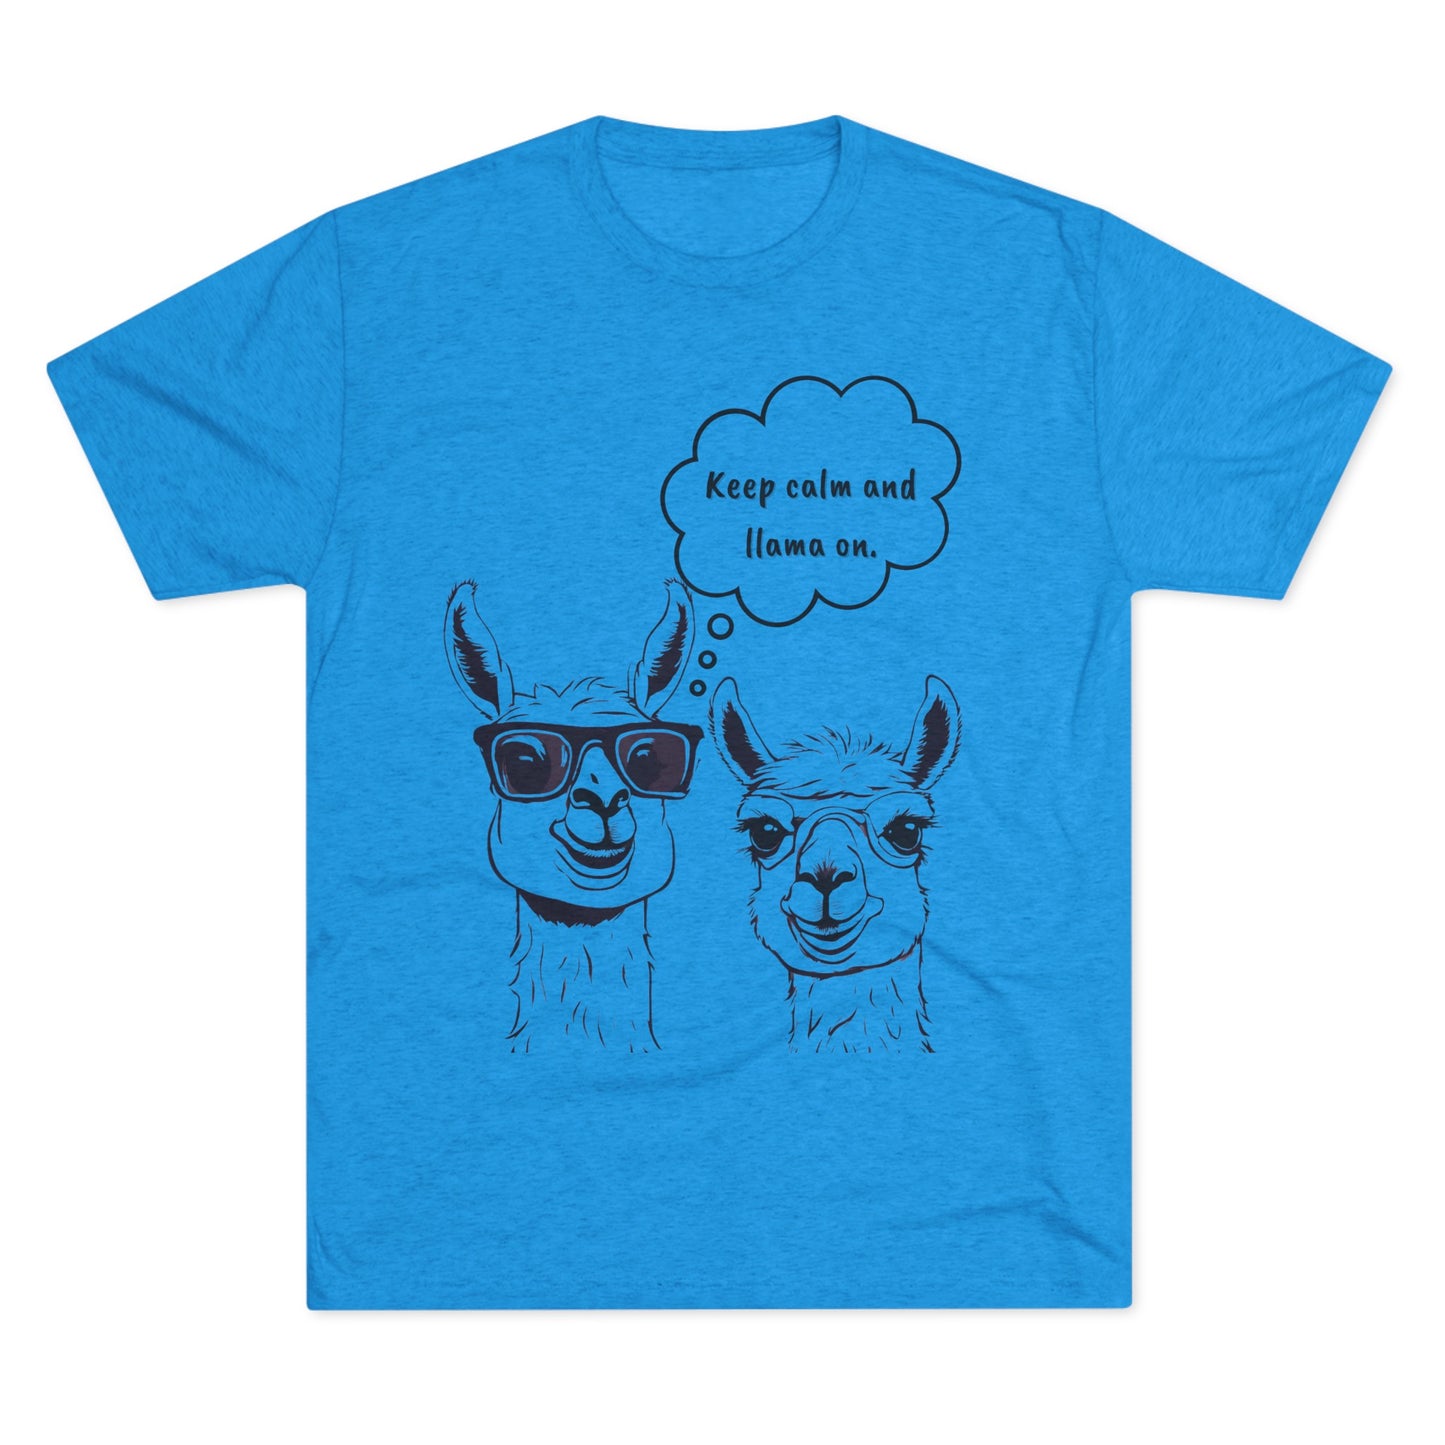 A blue Keep Calm and Llama On - Tri-Blend Crew Tee - Unisex Fit from Printify featuring a graphic of two llamas. One llama wears sunglasses, and a speech bubble above its head says, "Keep calm and llama on." The design is drawn in a simple, casual black print on breathable fabric for ultimate comfort.